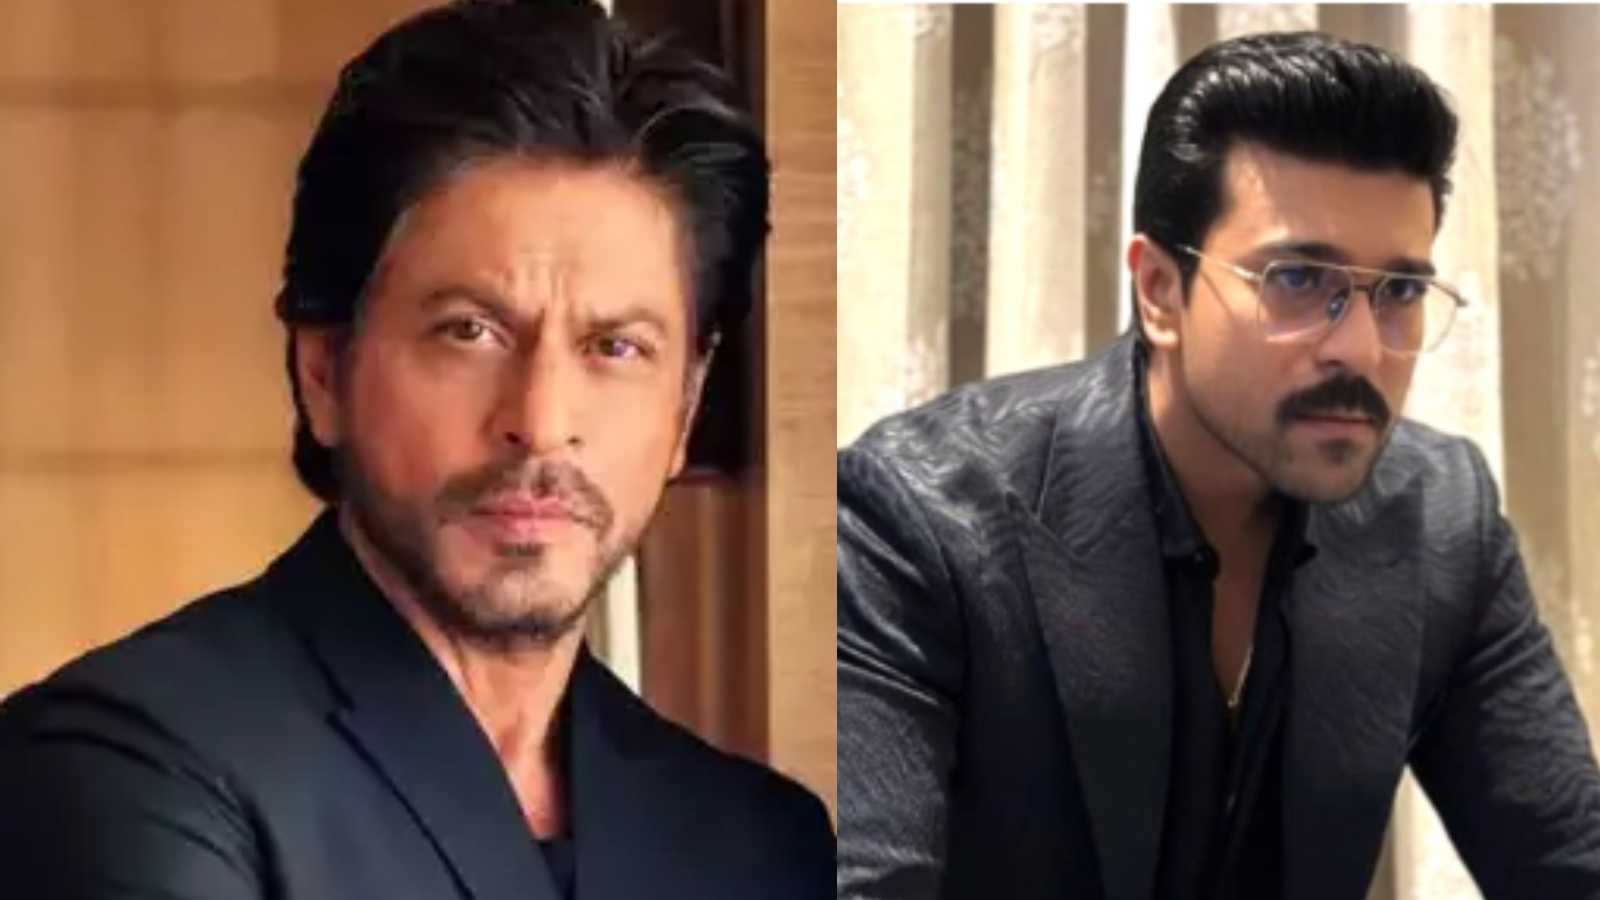 'I walked out': Shah Rukh Khan accused of allegedly disrespecting Ram Charan by latter's makeup artist at Ambani event